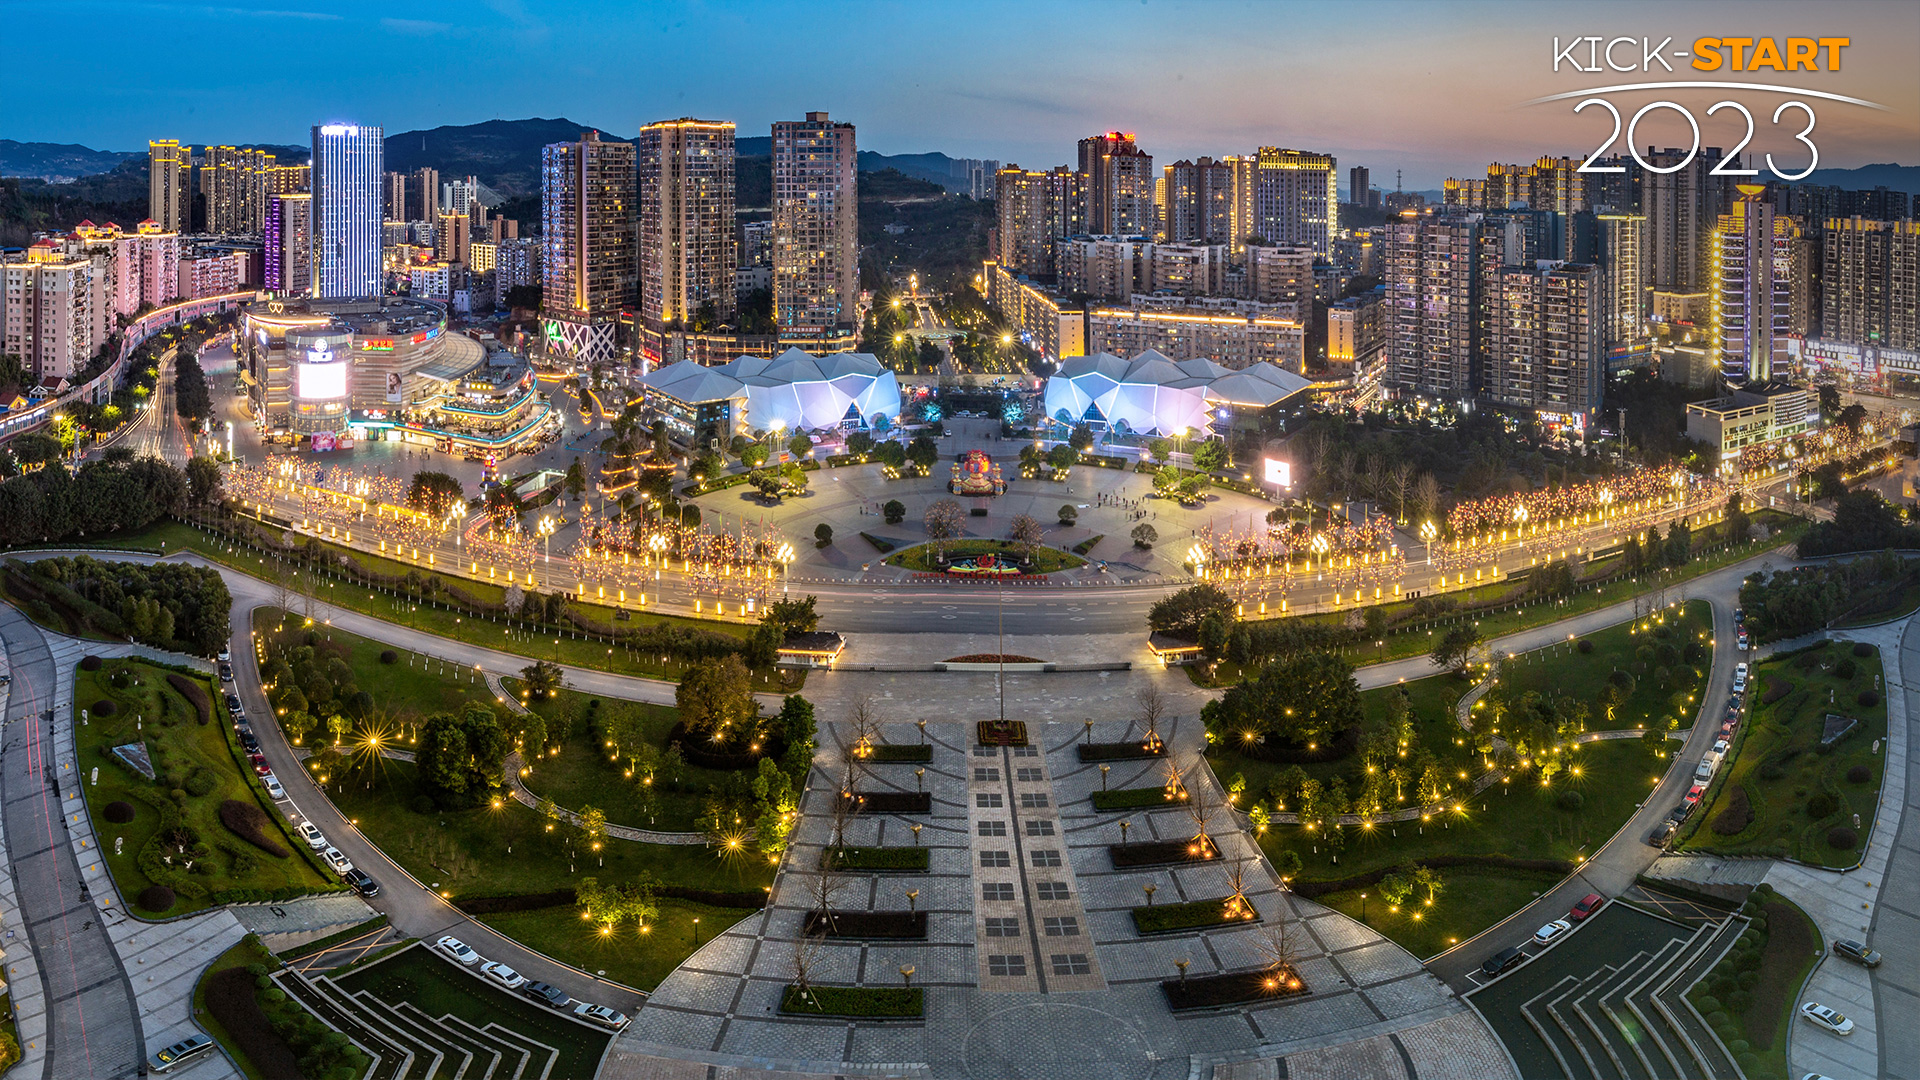 Live: Kick start 2023 – enjoy the charm of Dazhou City in SW China's Sichuan Province